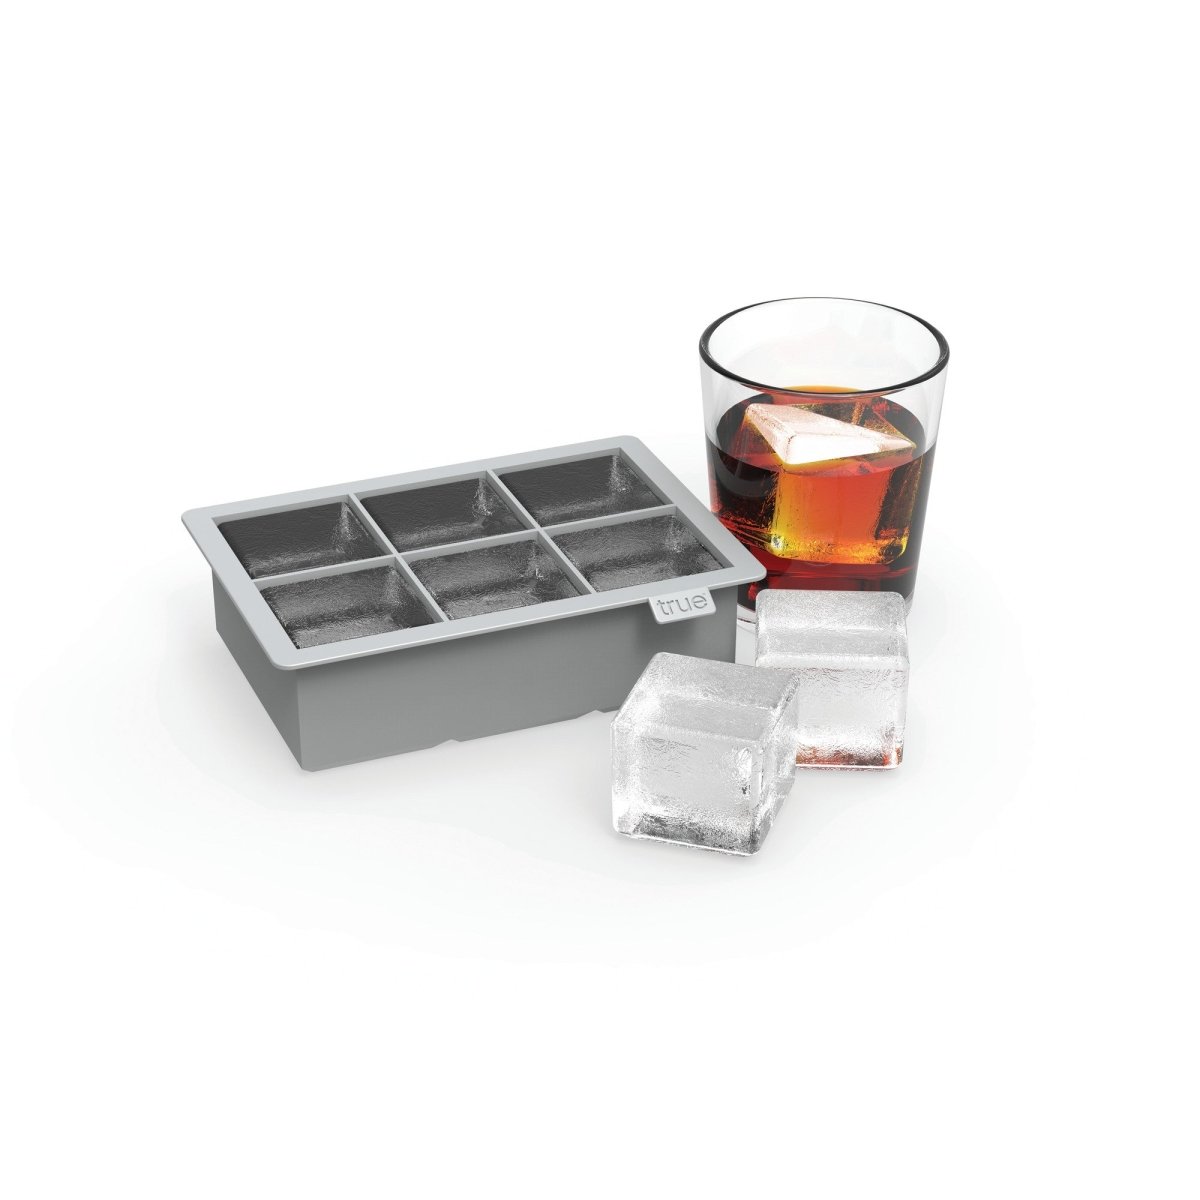 https://cdn.shopify.com/s/files/1/0275/1876/3088/products/colossal-ice-cube-tray-377621_1445x.jpg?v=1666386713